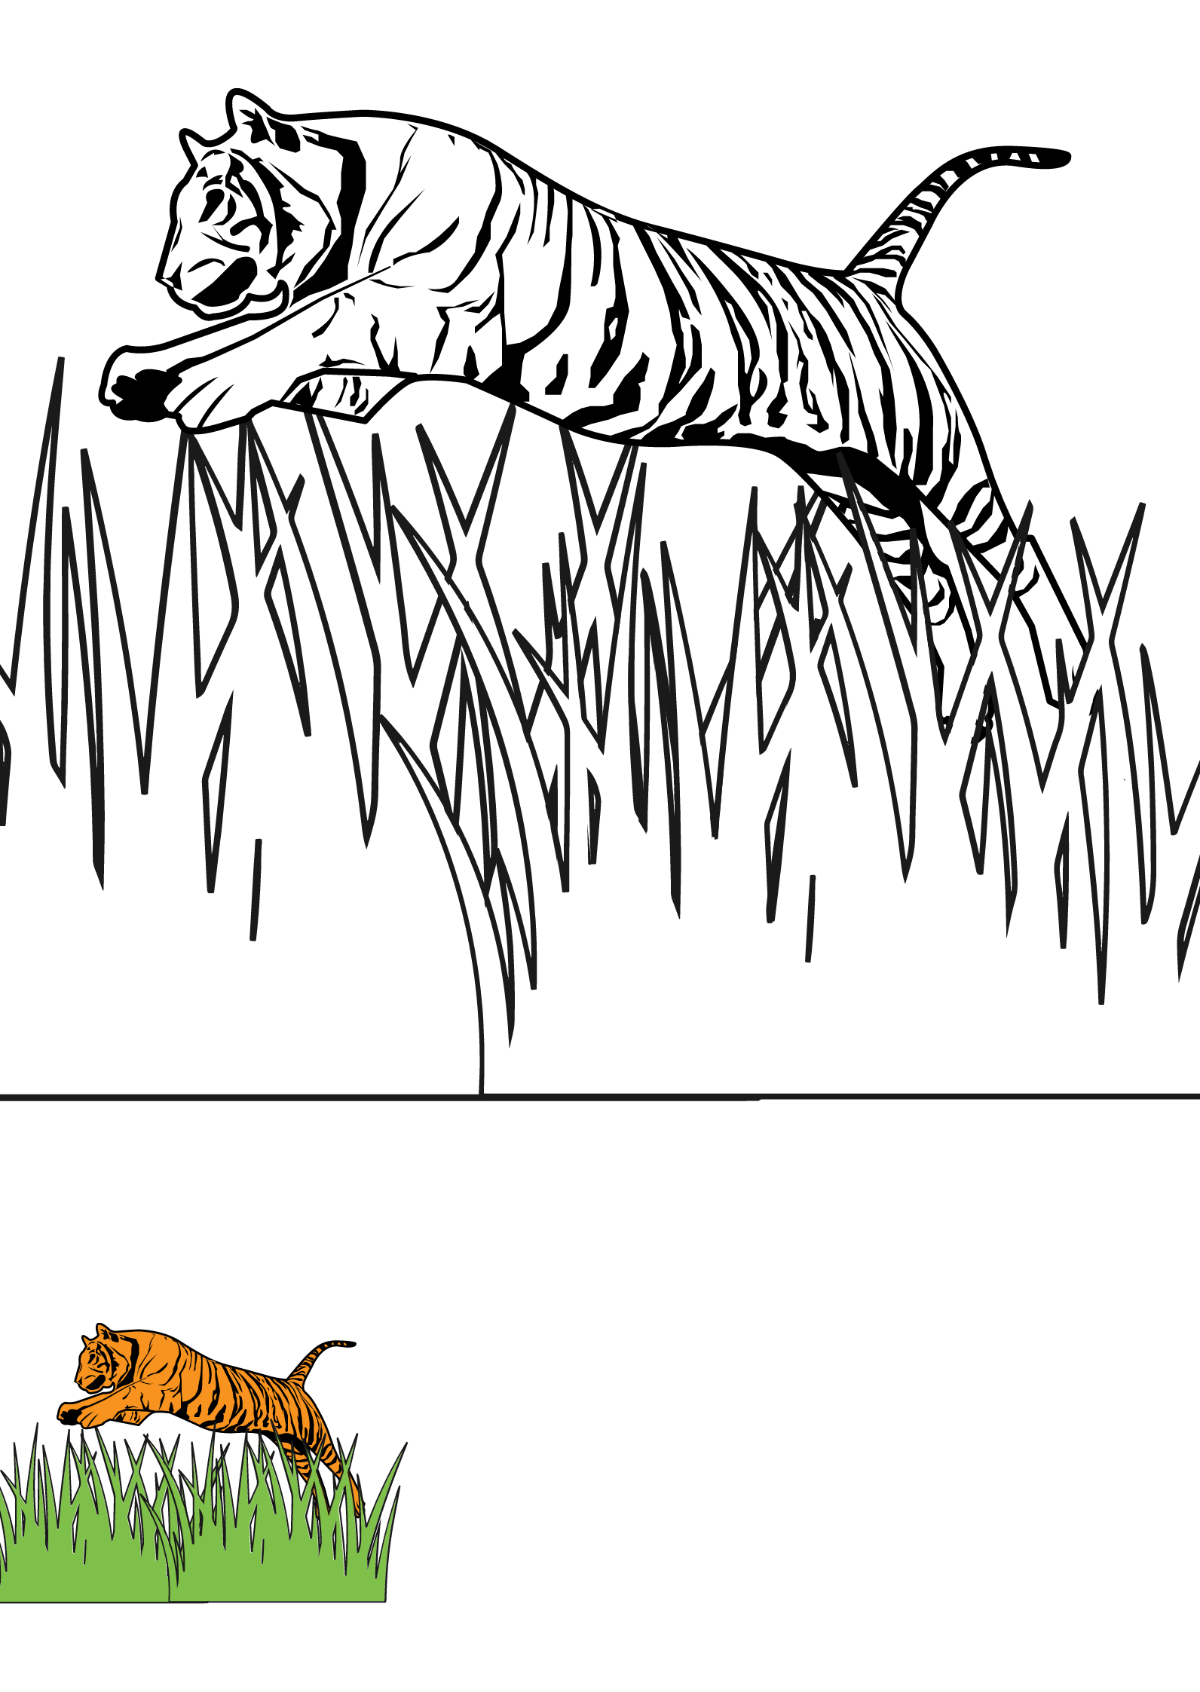 Jumping Tiger Coloring Page Template